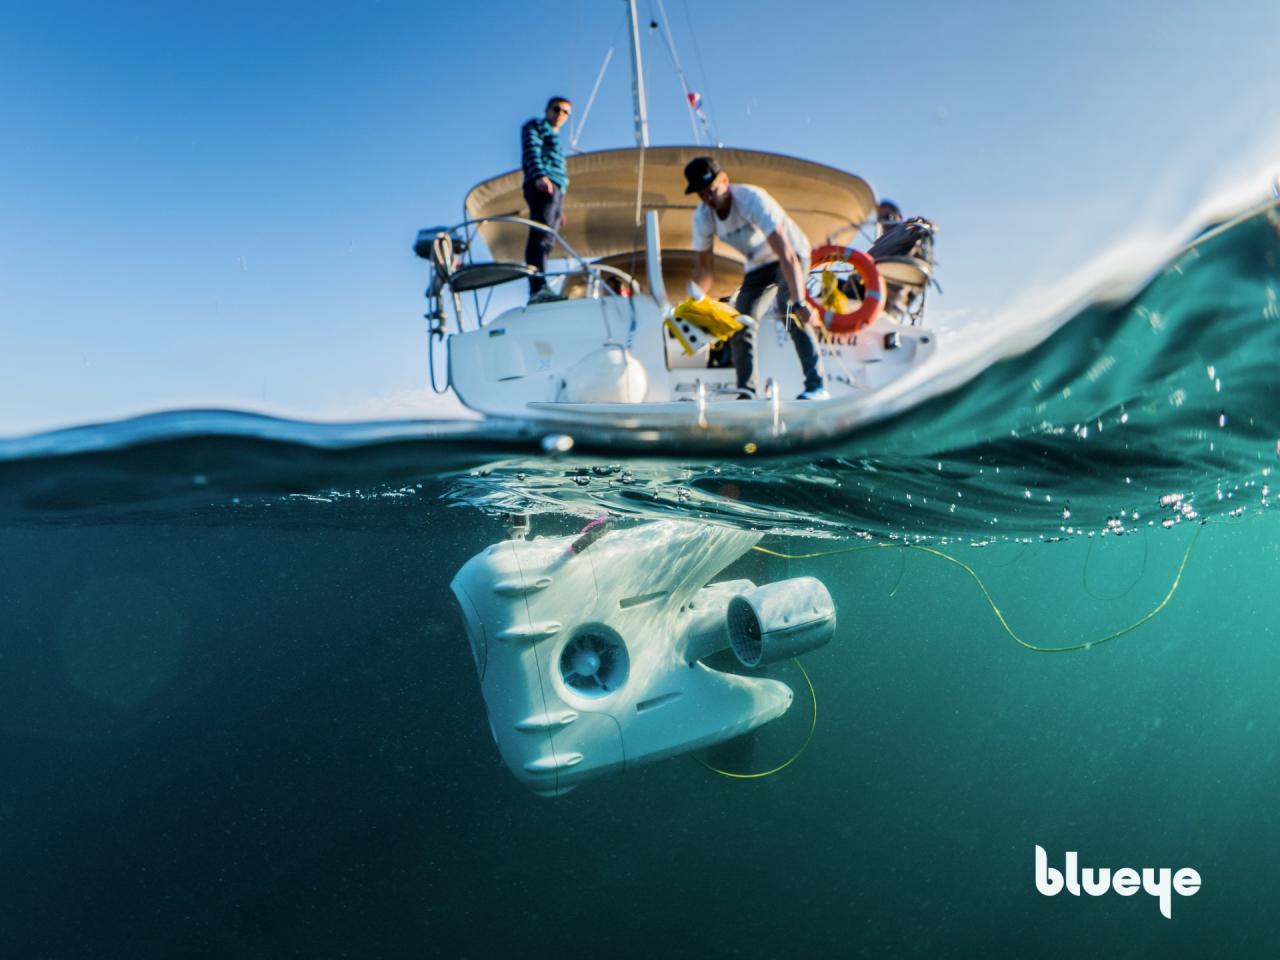 PioneerOne drone launched into the blue Adriatic sea from the back of a sailboat